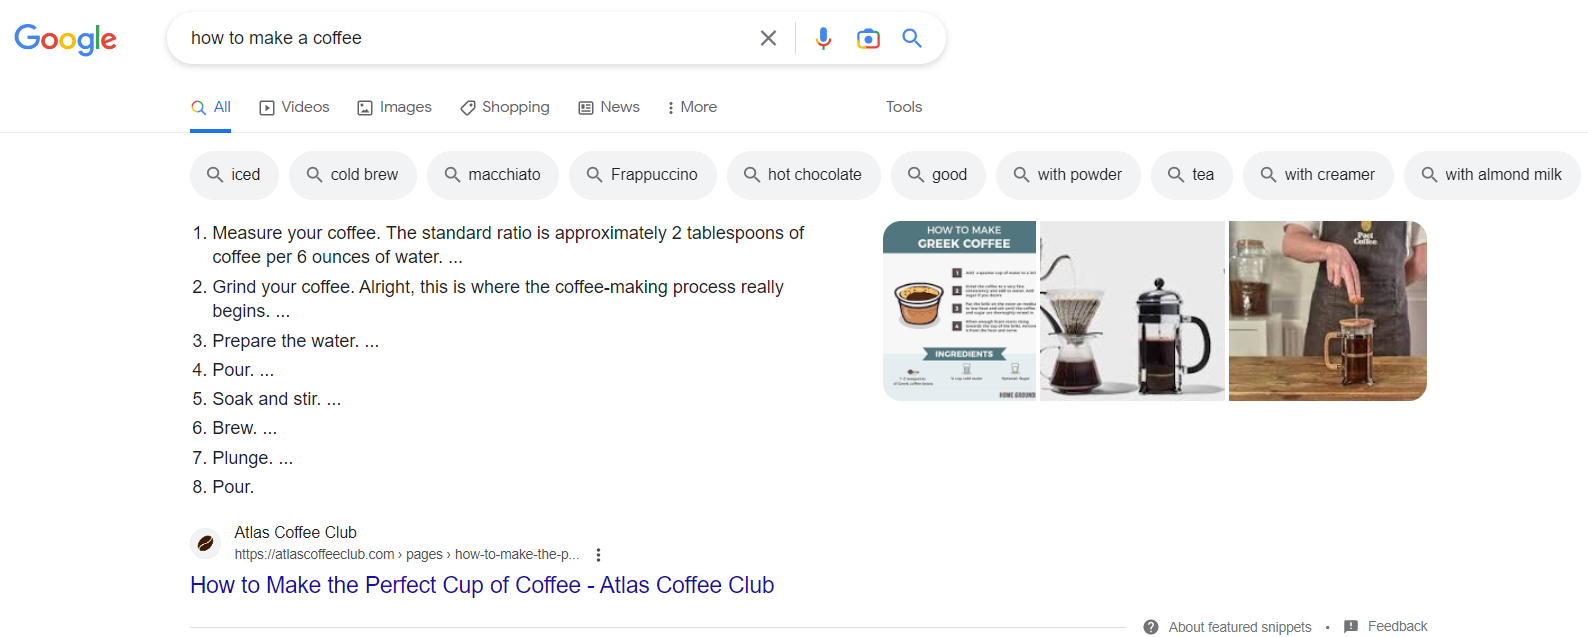 Google results for the keyphrase 'how to make a coffee'